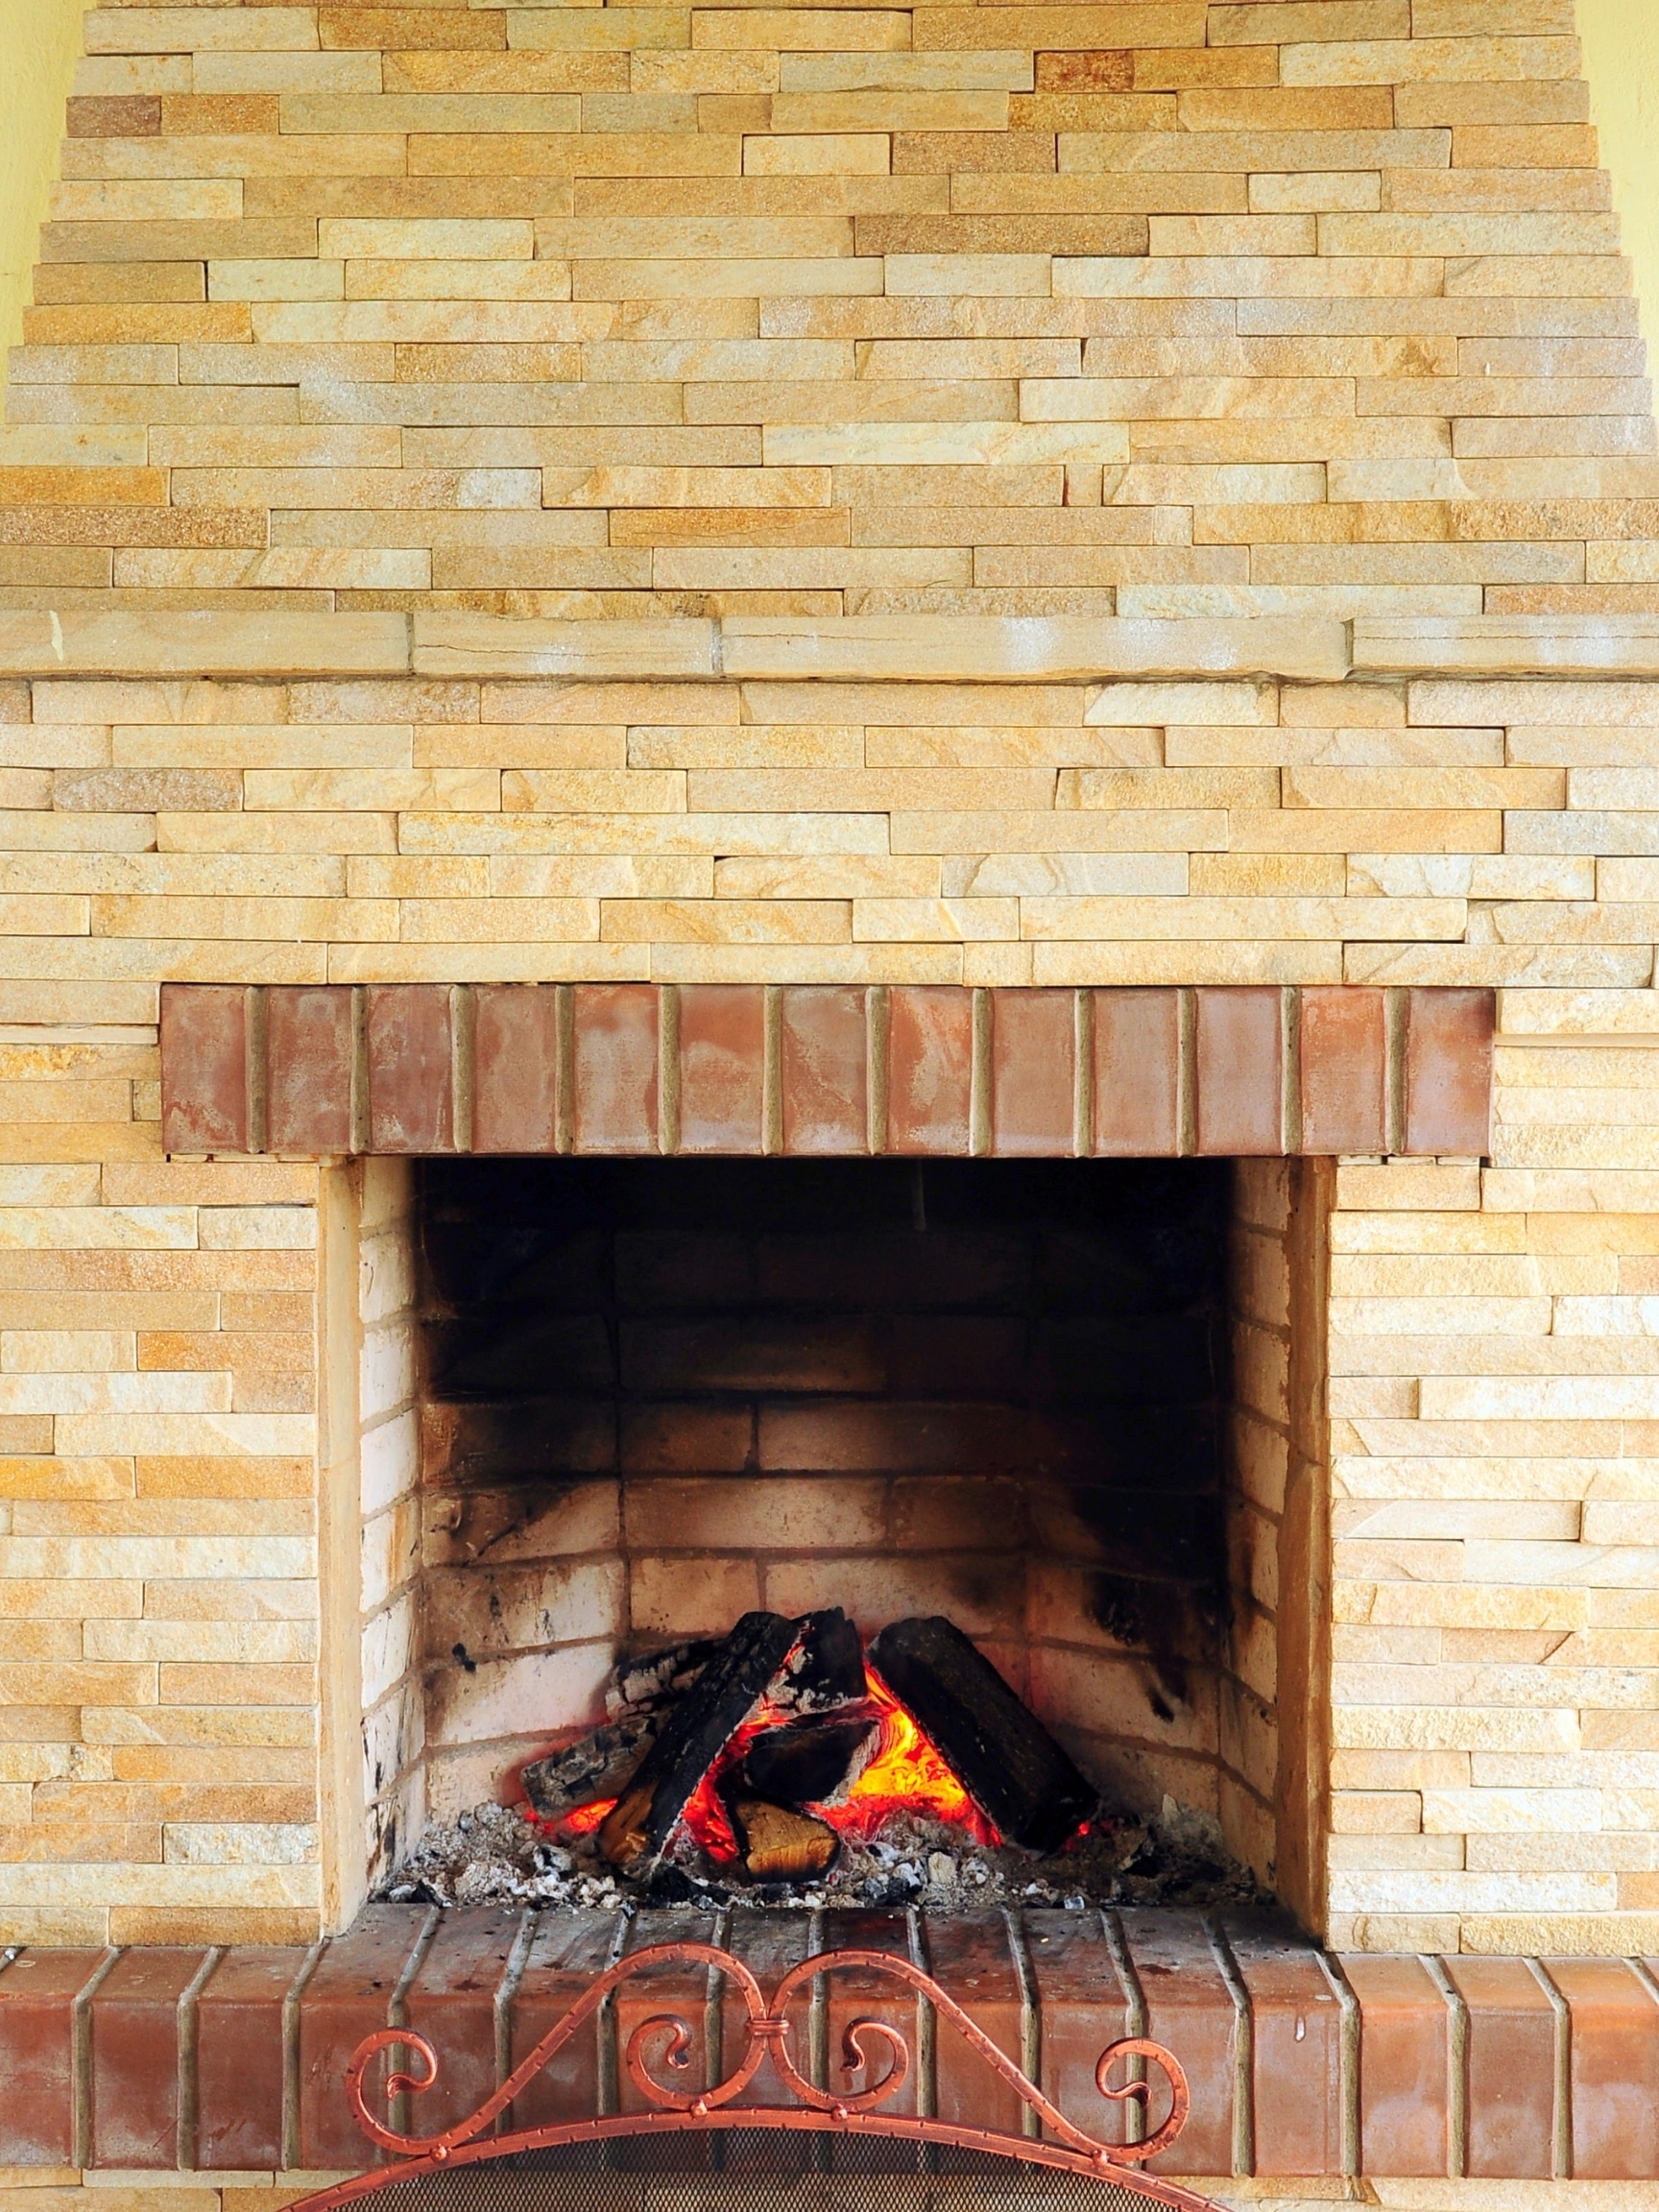 5 Best Ways To Clean Fireplace Brick, How To Clean The Brick Around My Fireplace